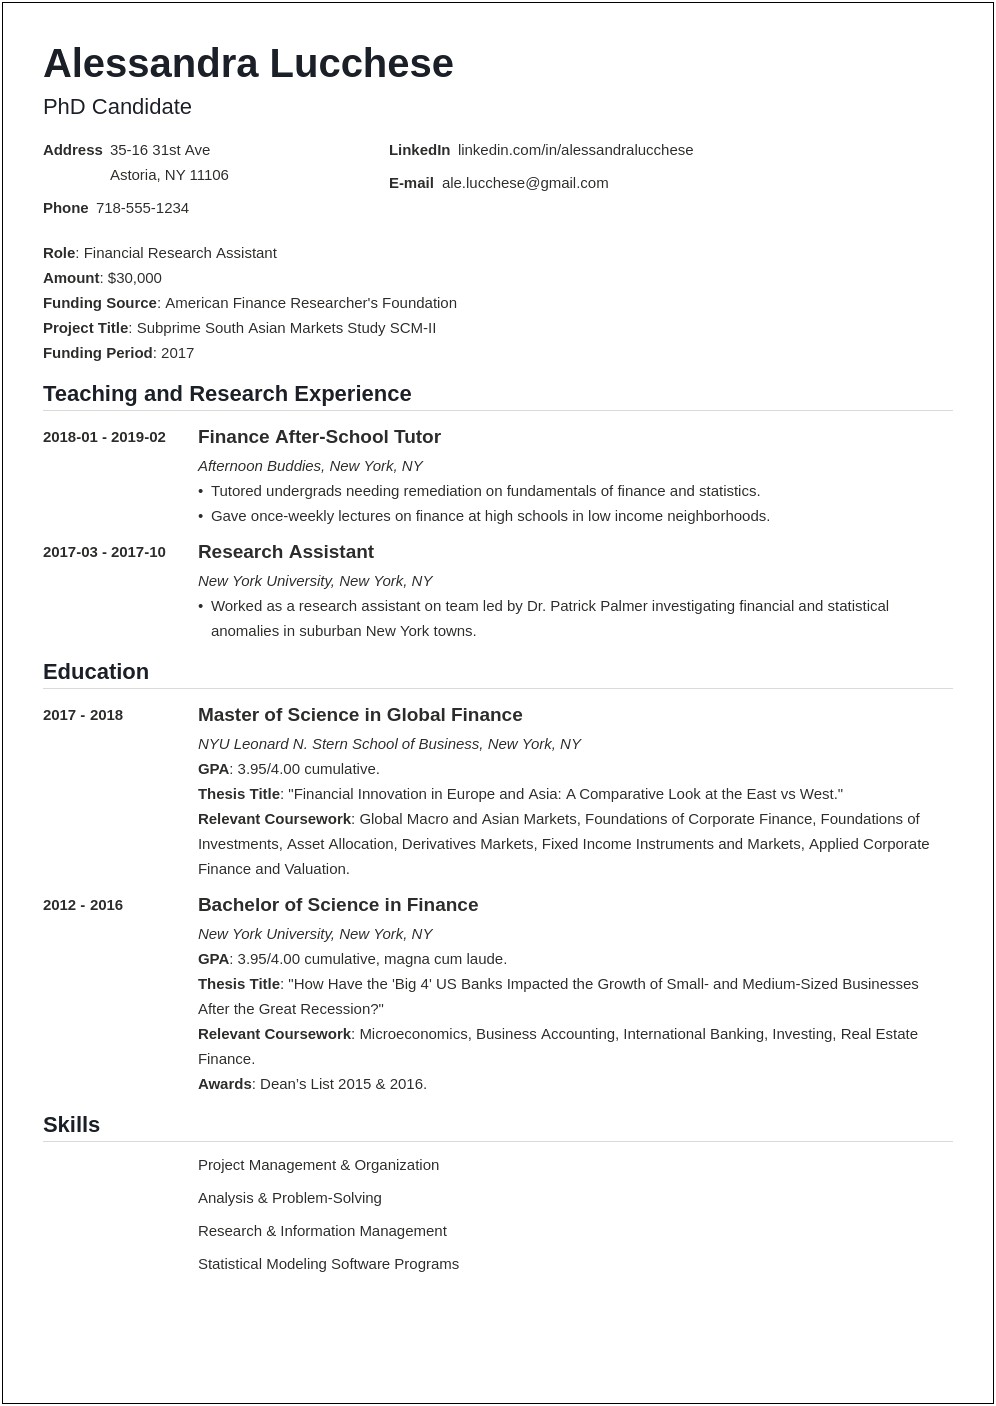 Are The Scholasatic Writing Awards Good For Resumes